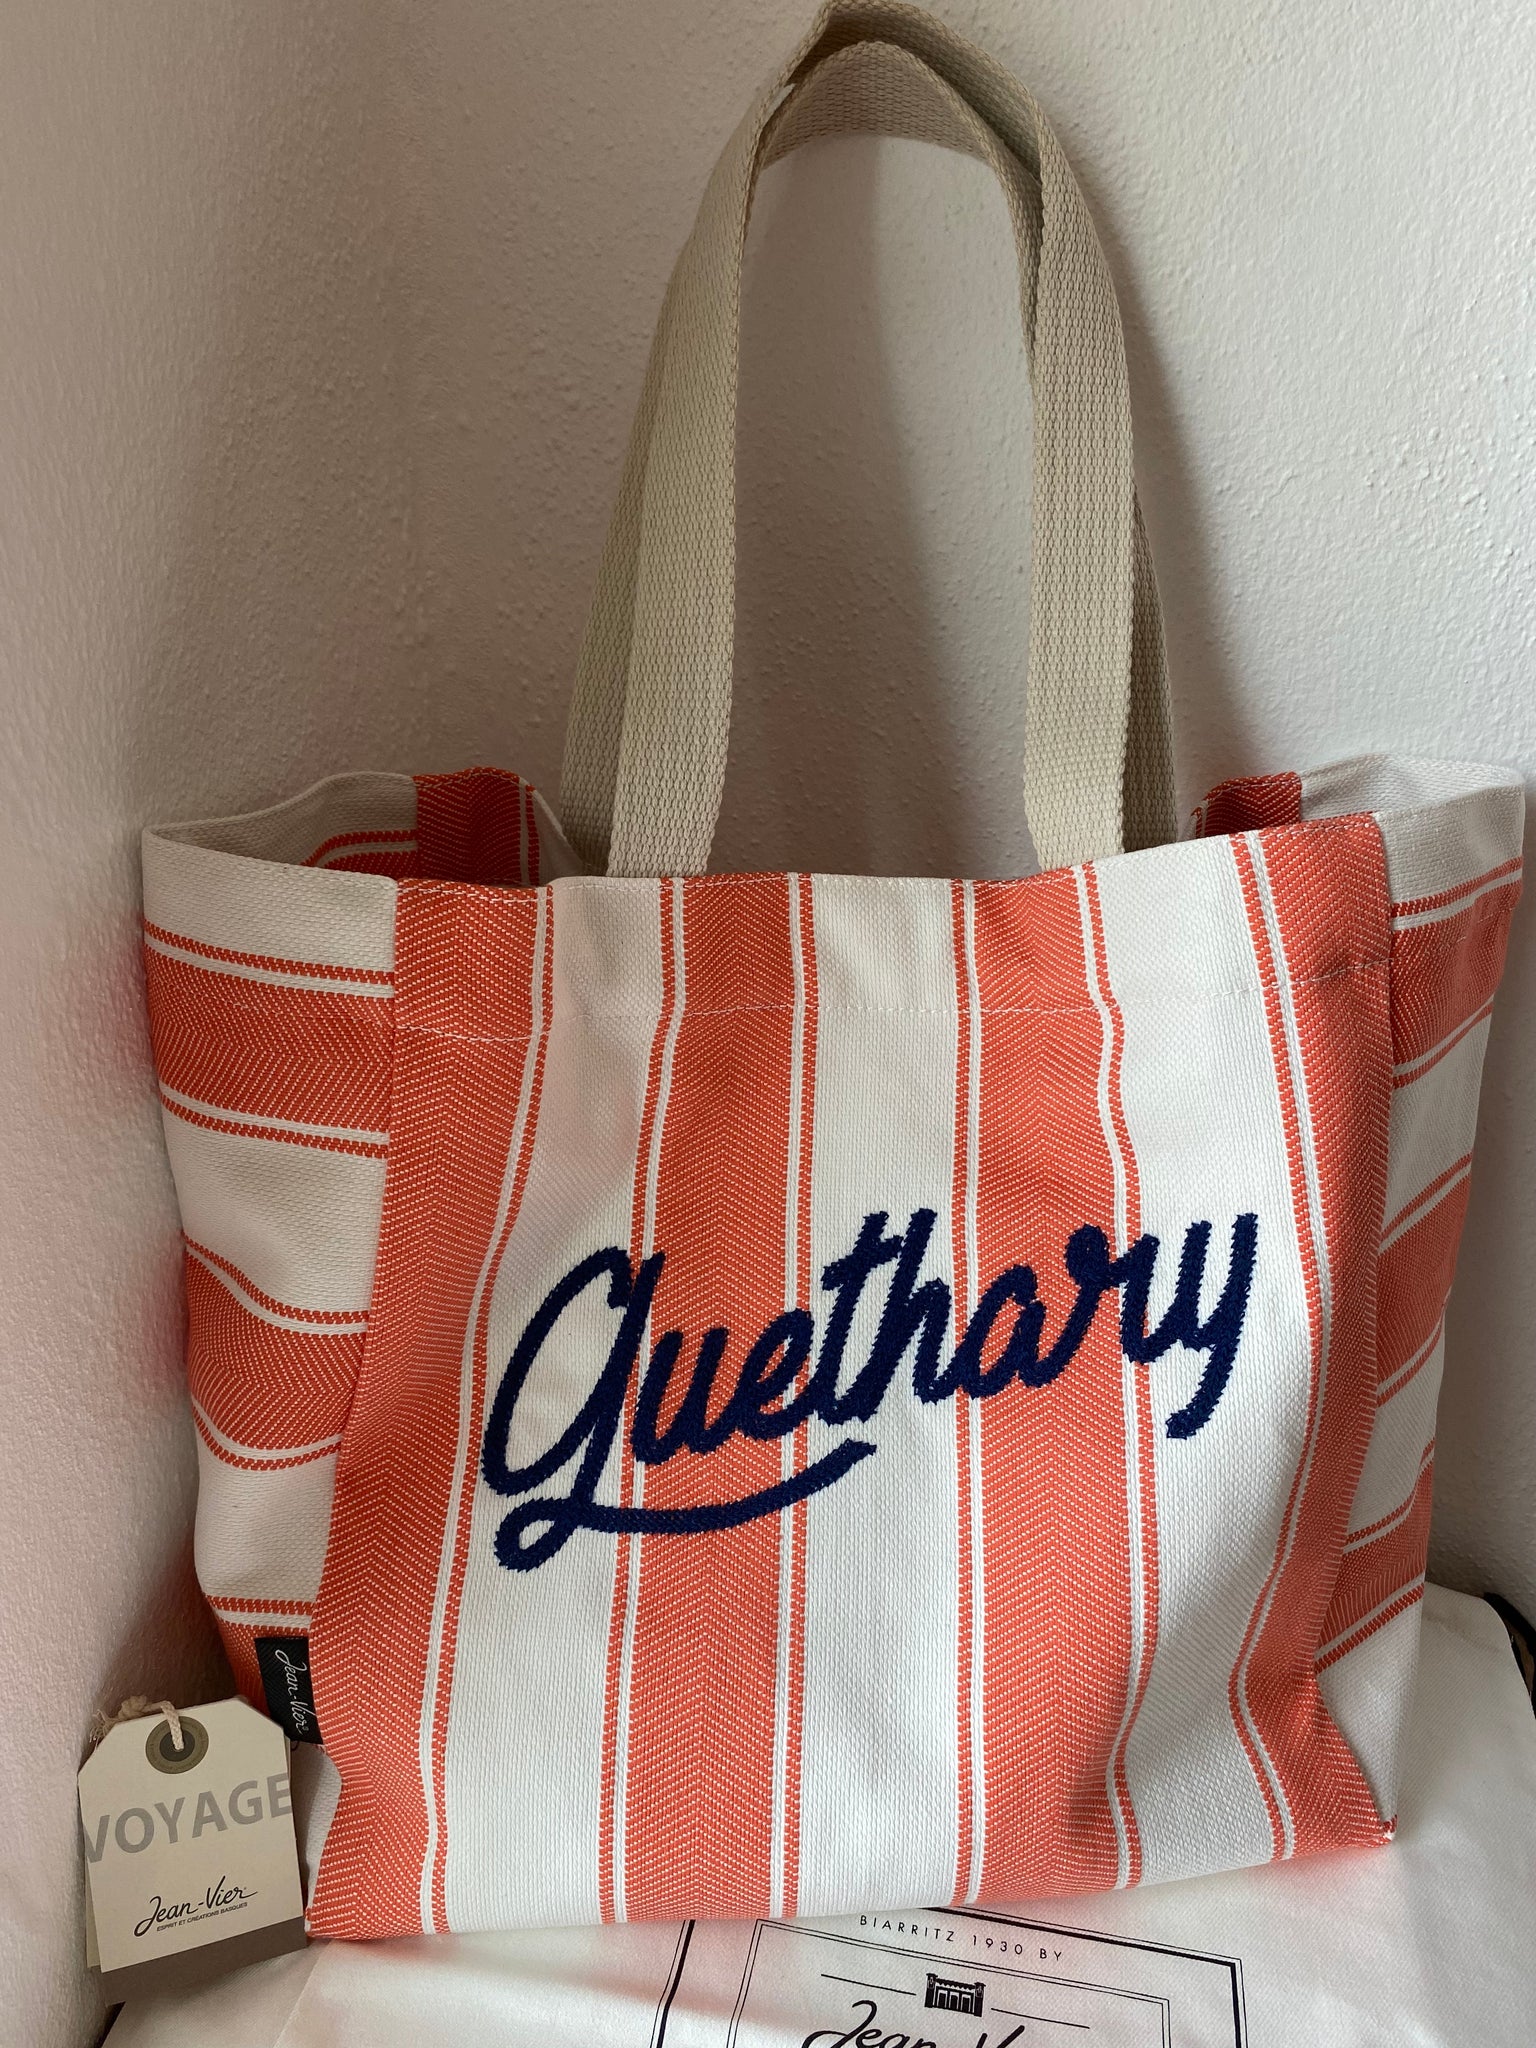 Beach bag, embroidered "Guethary" by Jean-Vier "Sac de Plage"